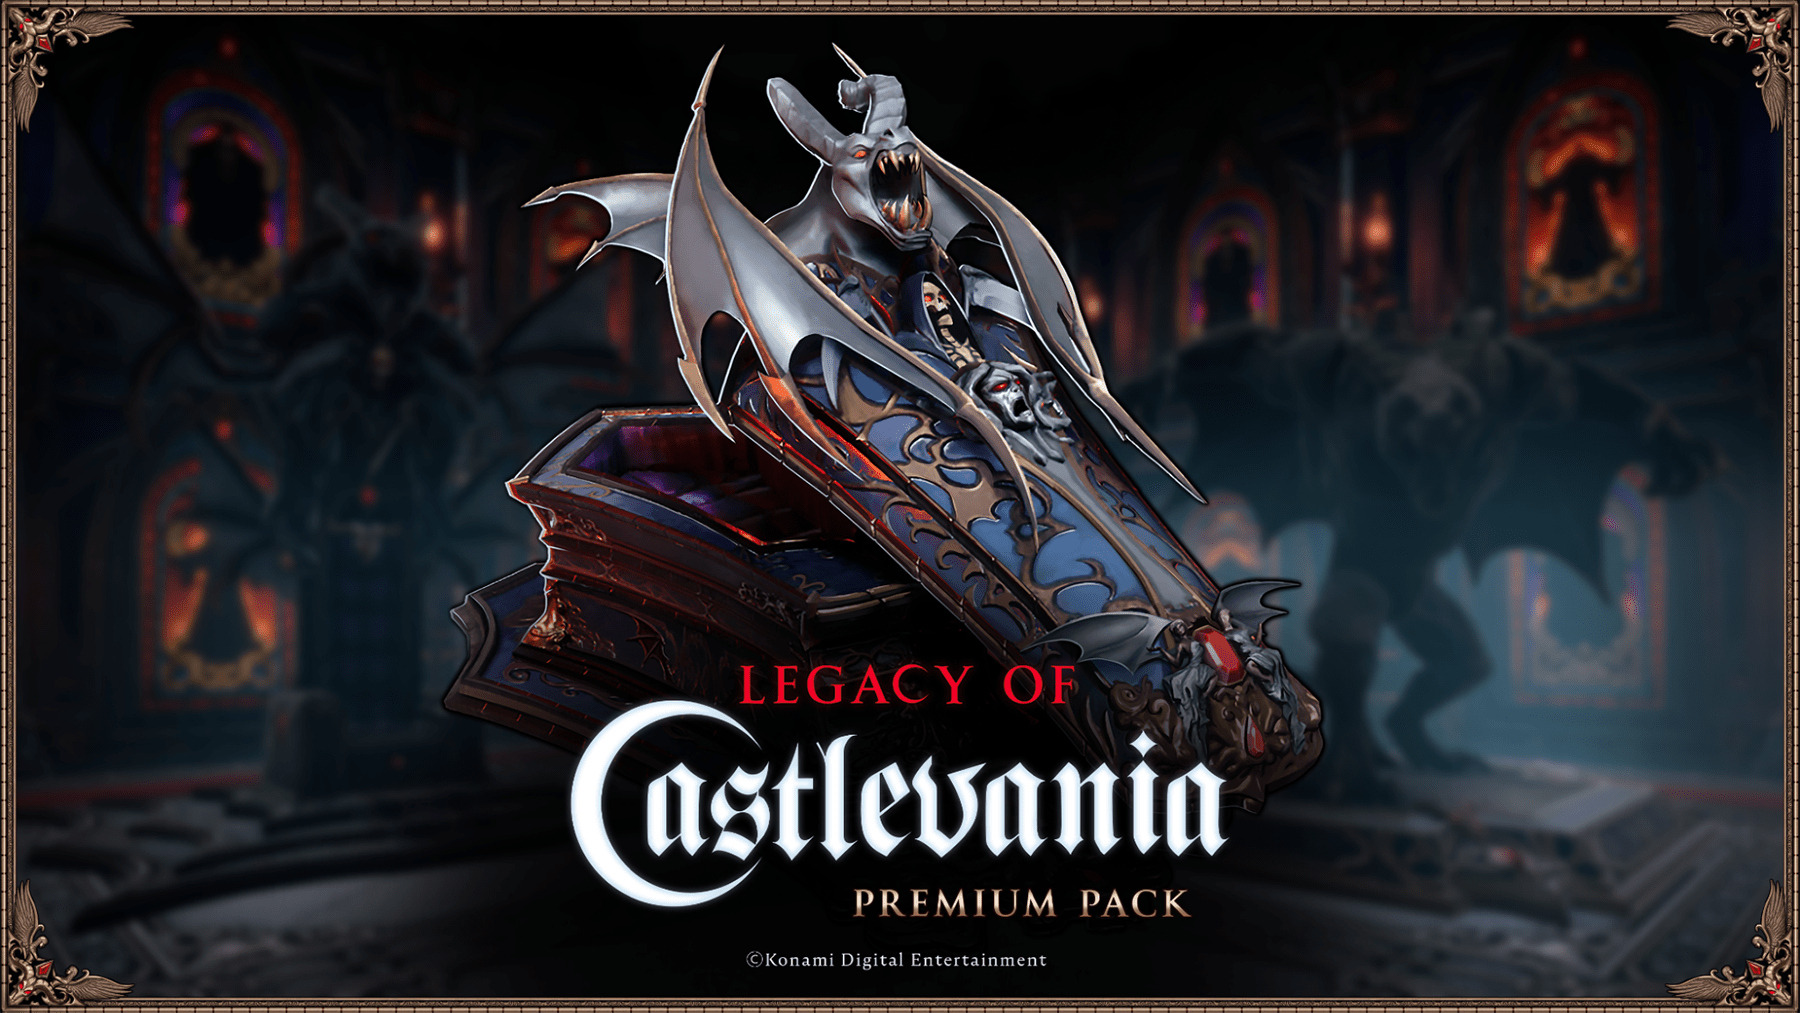 The launch of V Rising - Legacy of Castlevania collaboration will take place on 8 May